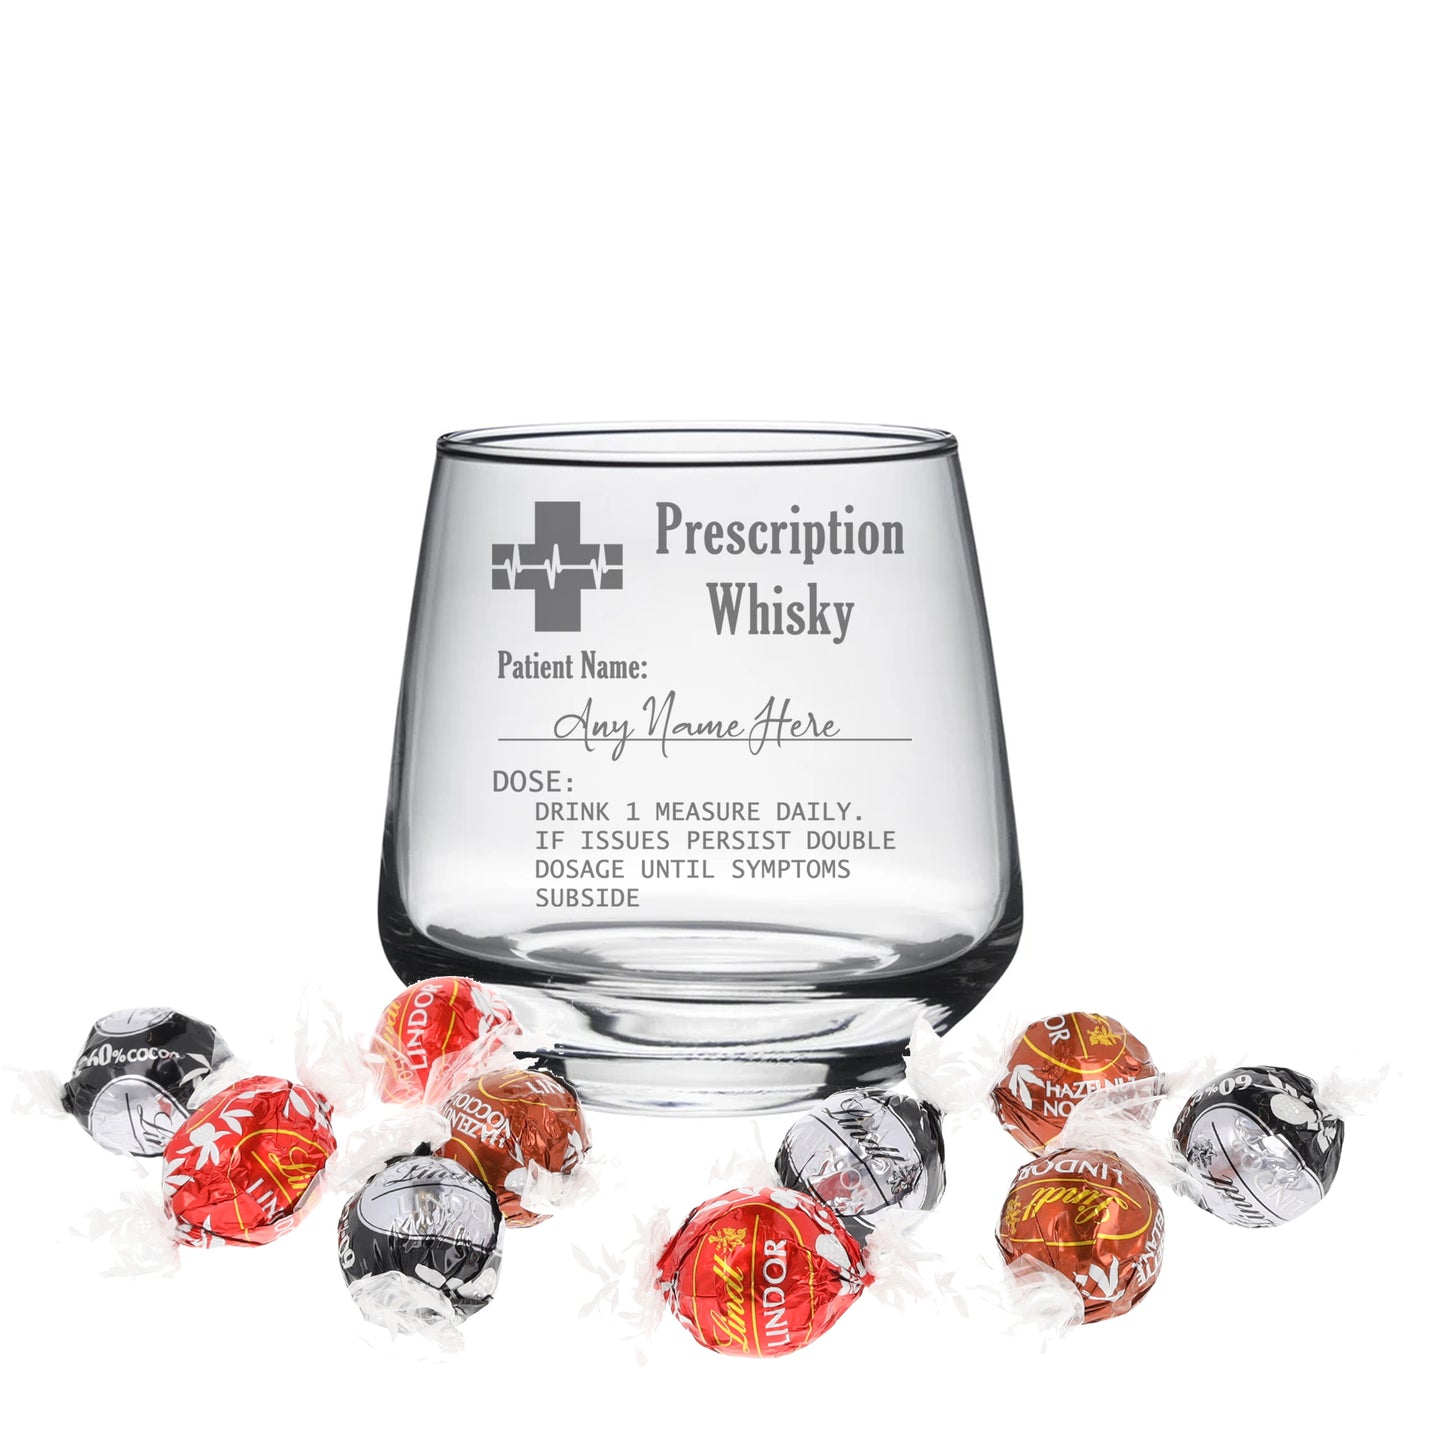 Personalised Engraved Prescription Vodka Glass with any Name  - Always Looking Good - Filled with Lindt Chocolates Small Tallo 